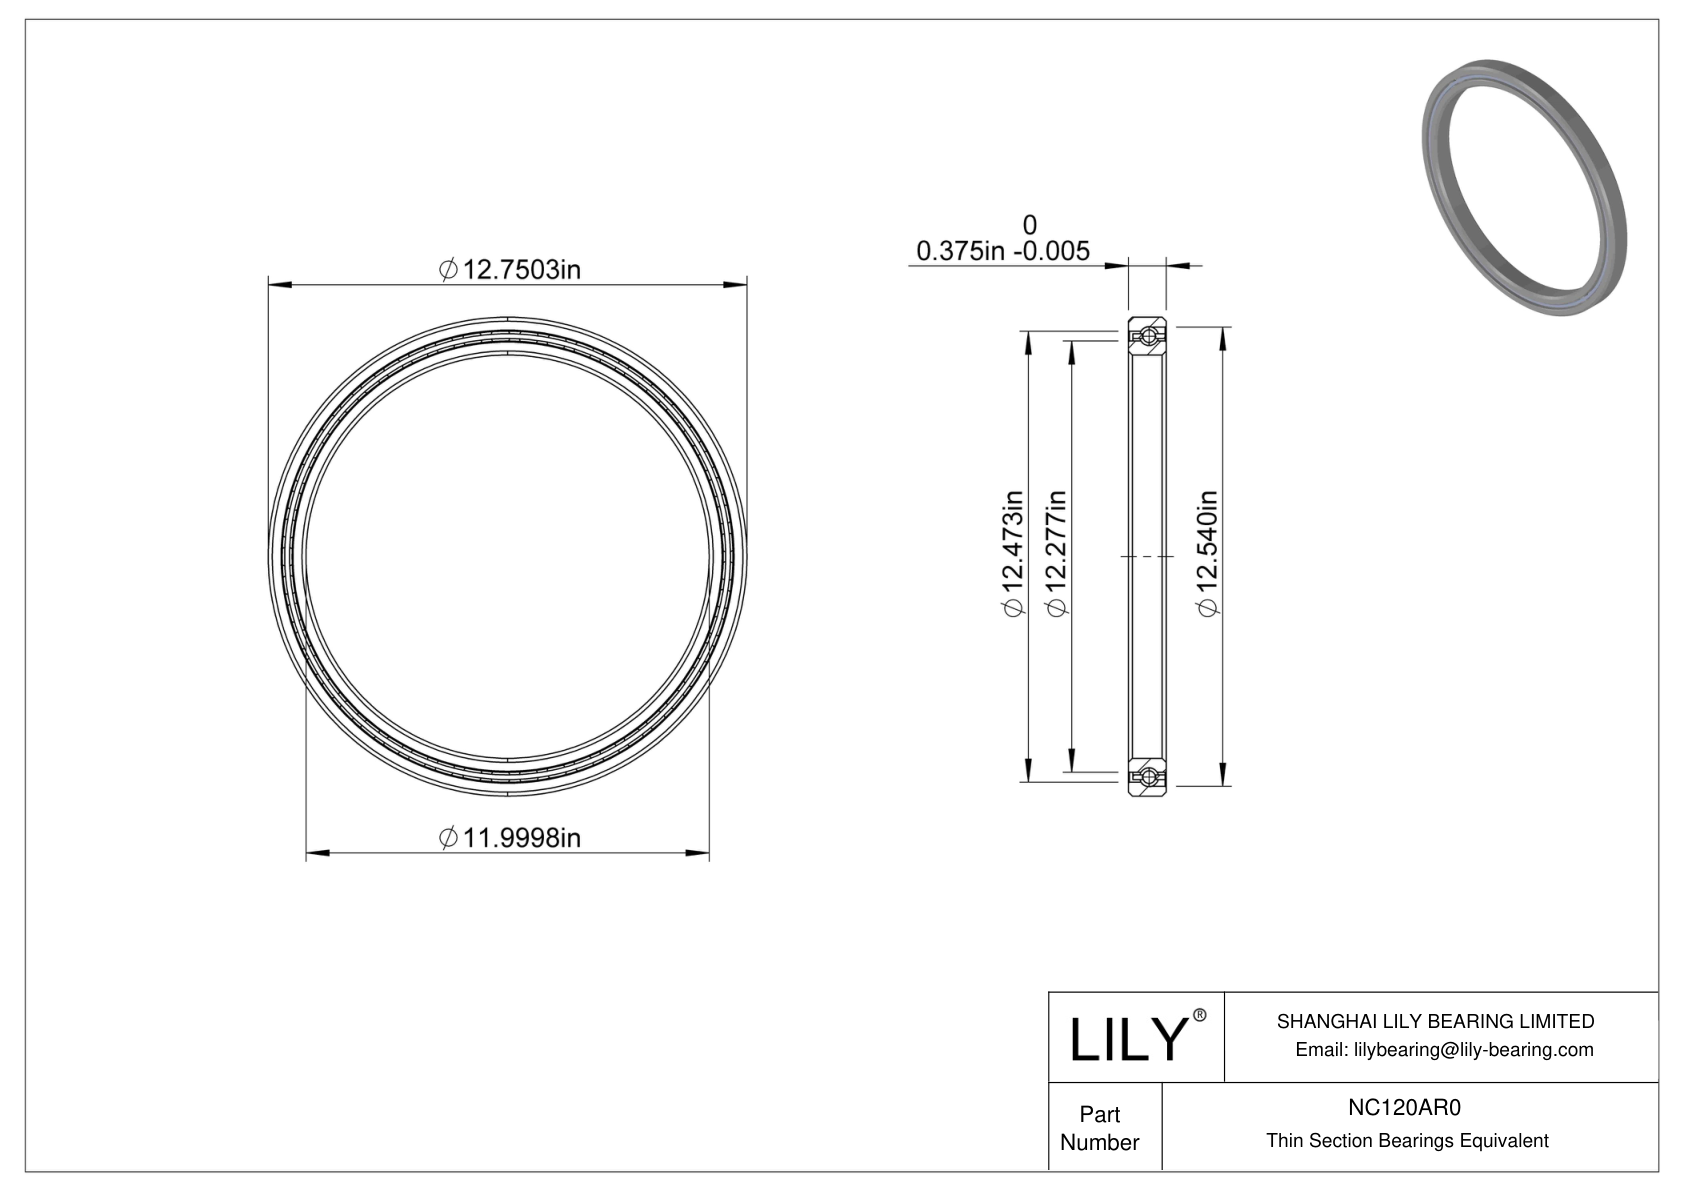 NC120AR0 Constant Section (CS) Bearings cad drawing